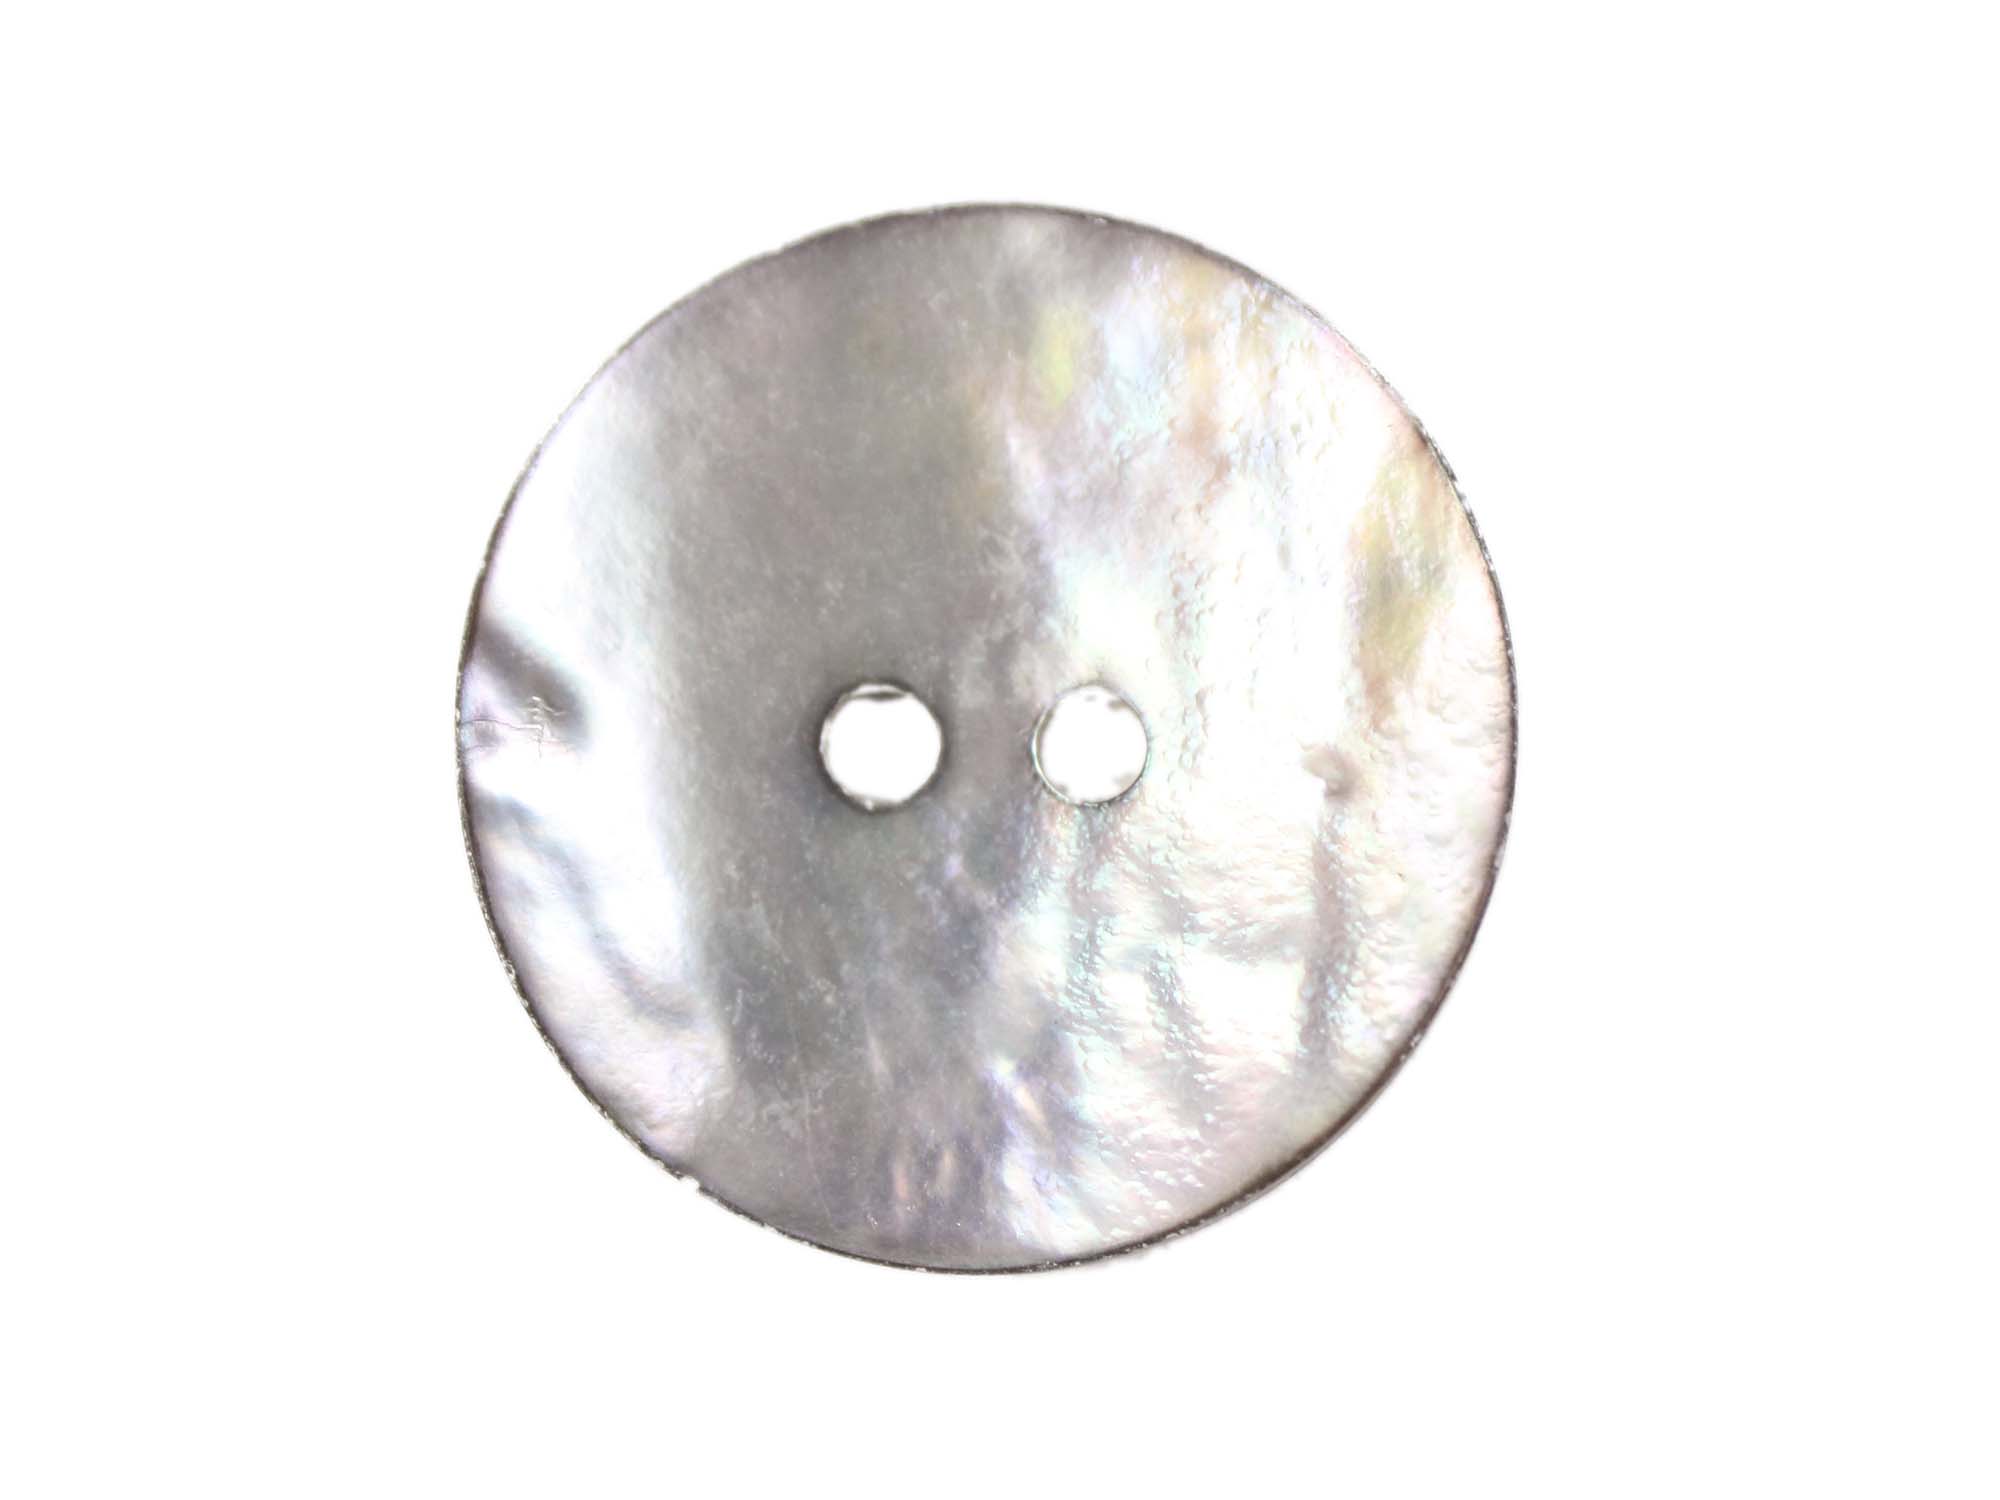 Smoked Akoya Mother of Pearl Button: 36L (23mm or 0.9") mother-of-pearl buttons, mother of pearl shell buttons, nacre, acoya, agoya